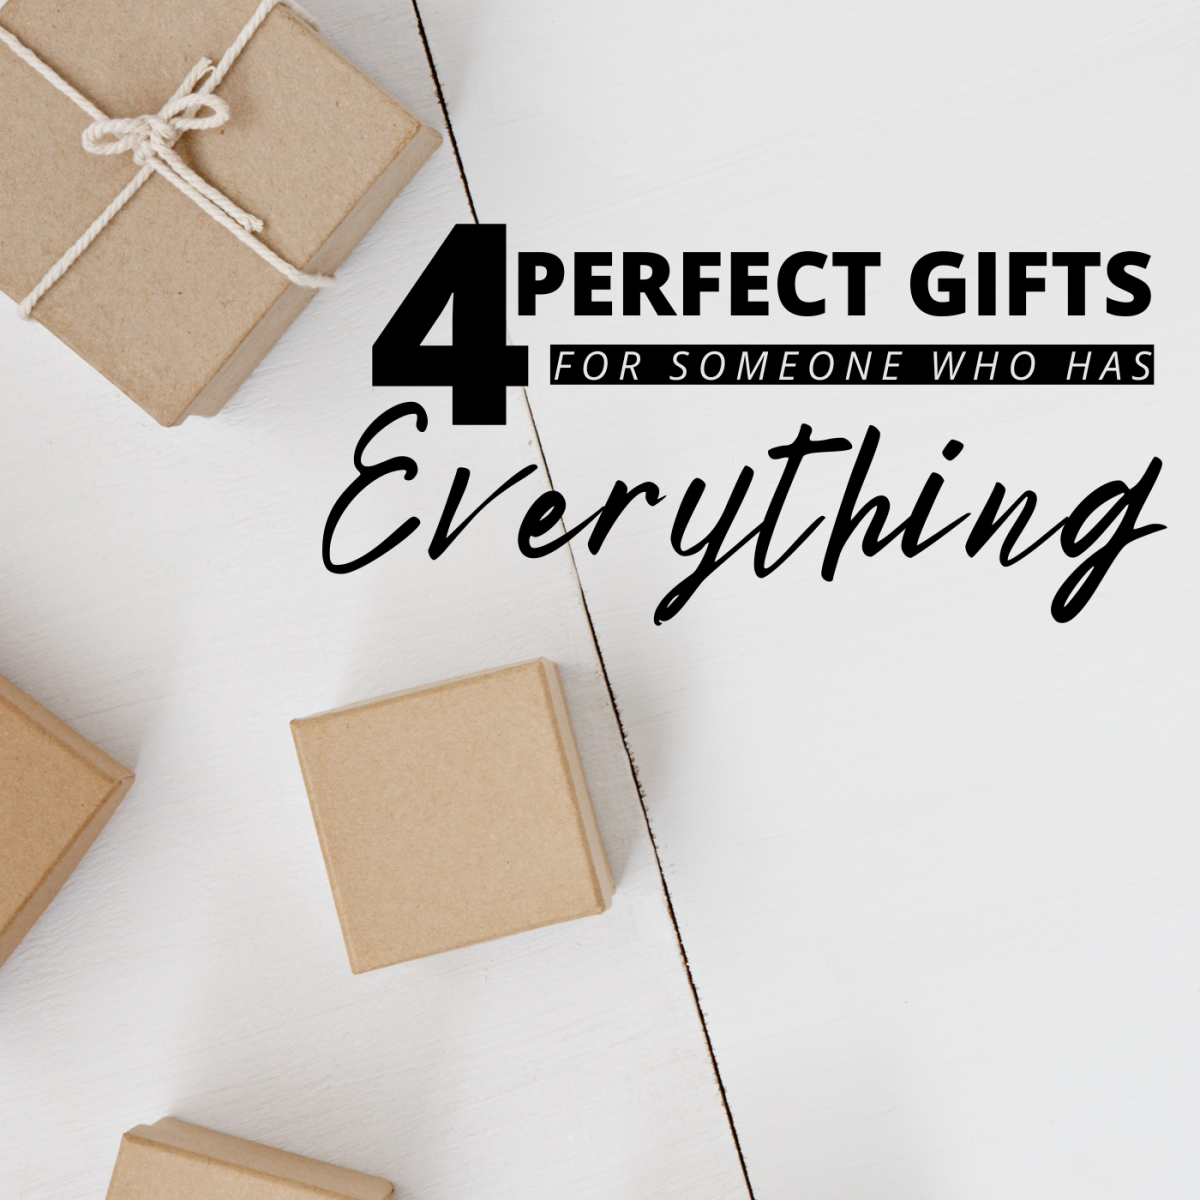 4 Gift Ideas Under $50 for Someone Who Has Everything